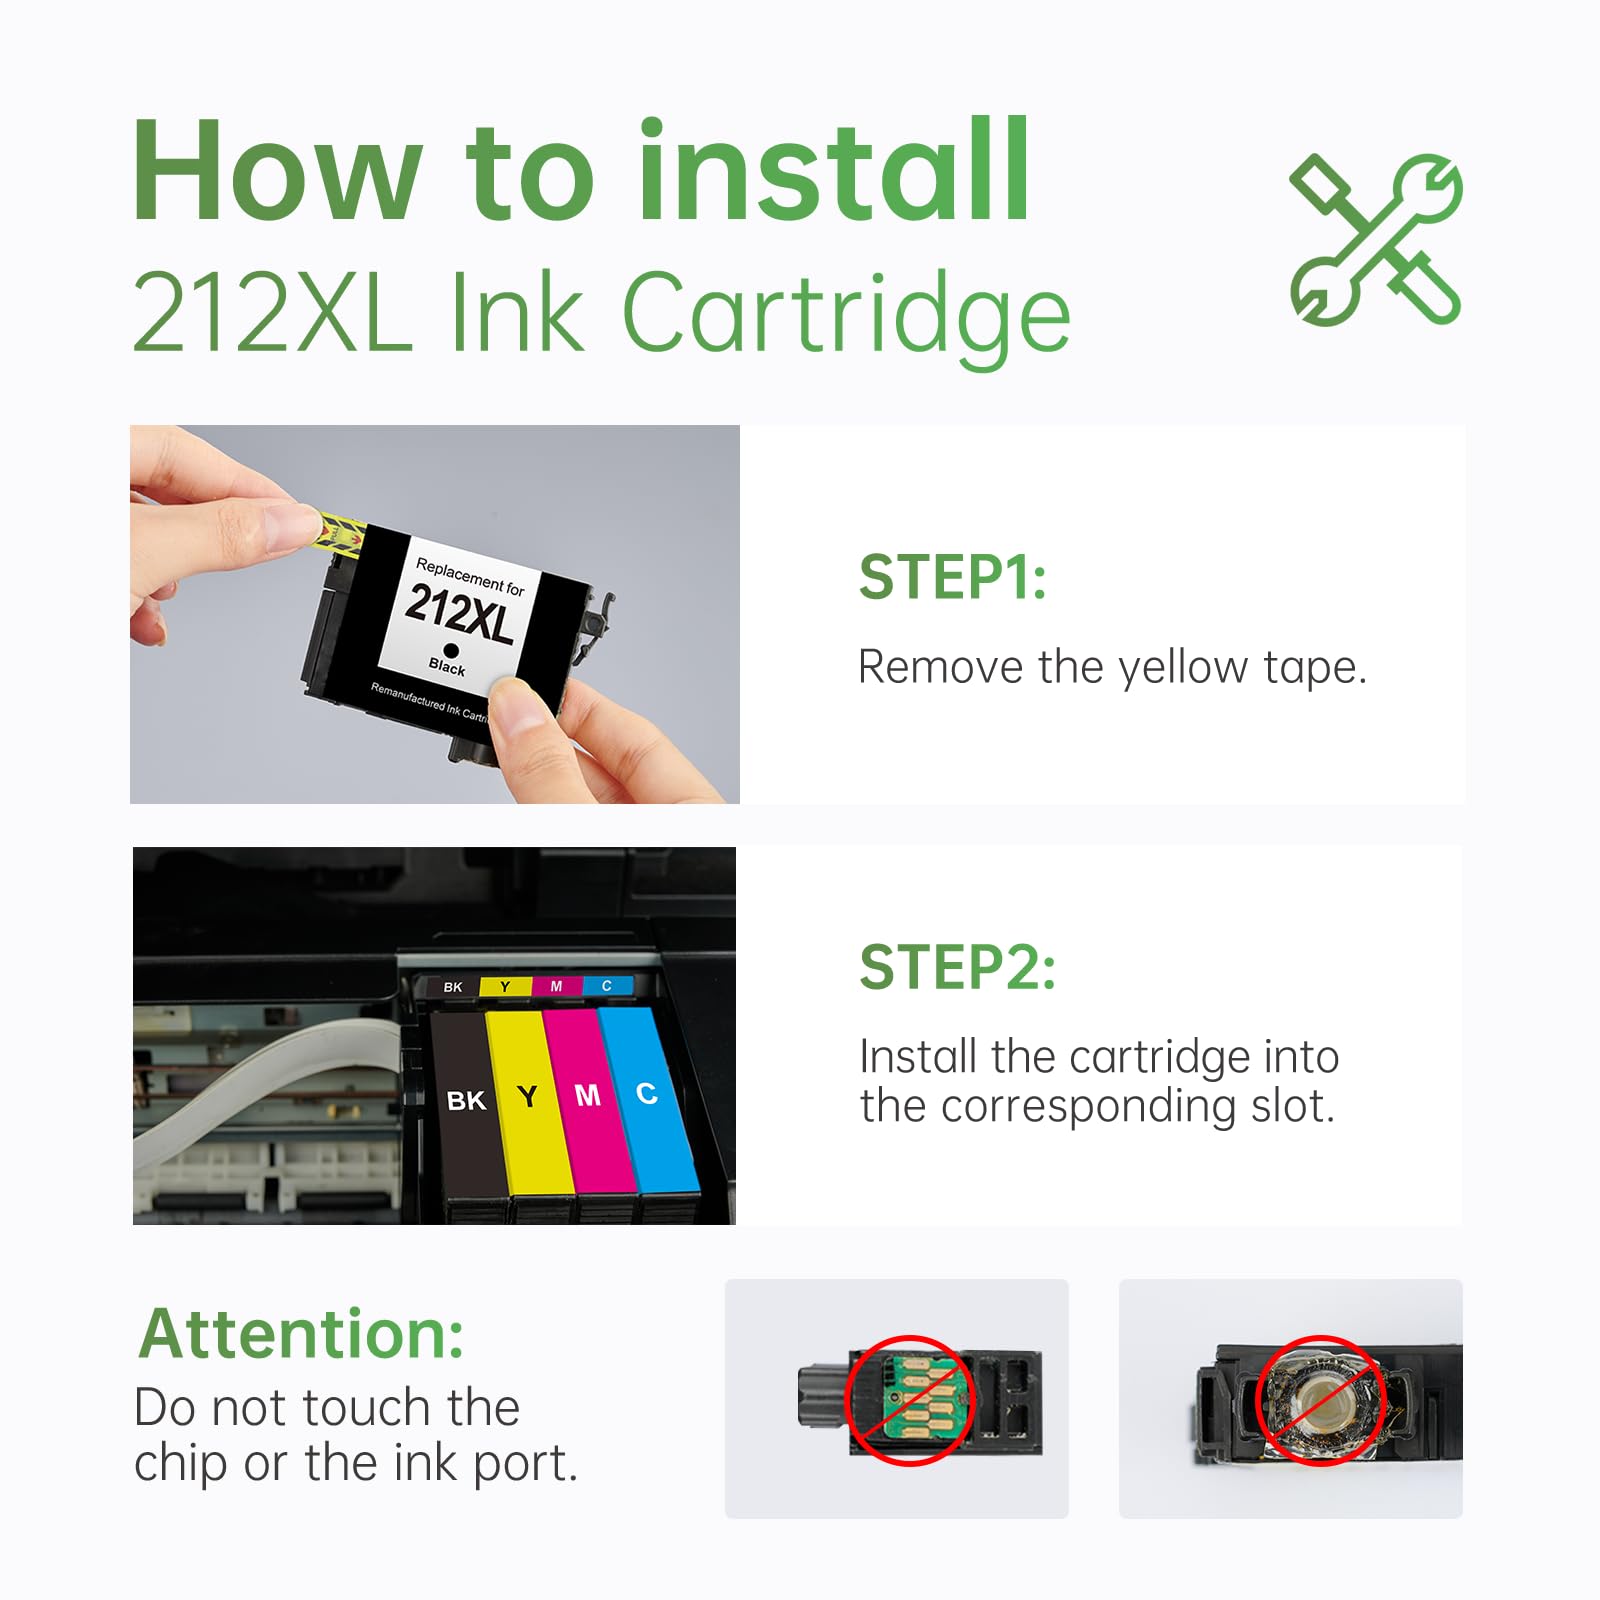 Step-by-step guide on how to install 212XL ink cartridges into a printer, highlighting the simple removal of yellow tape and correct slot insertion.